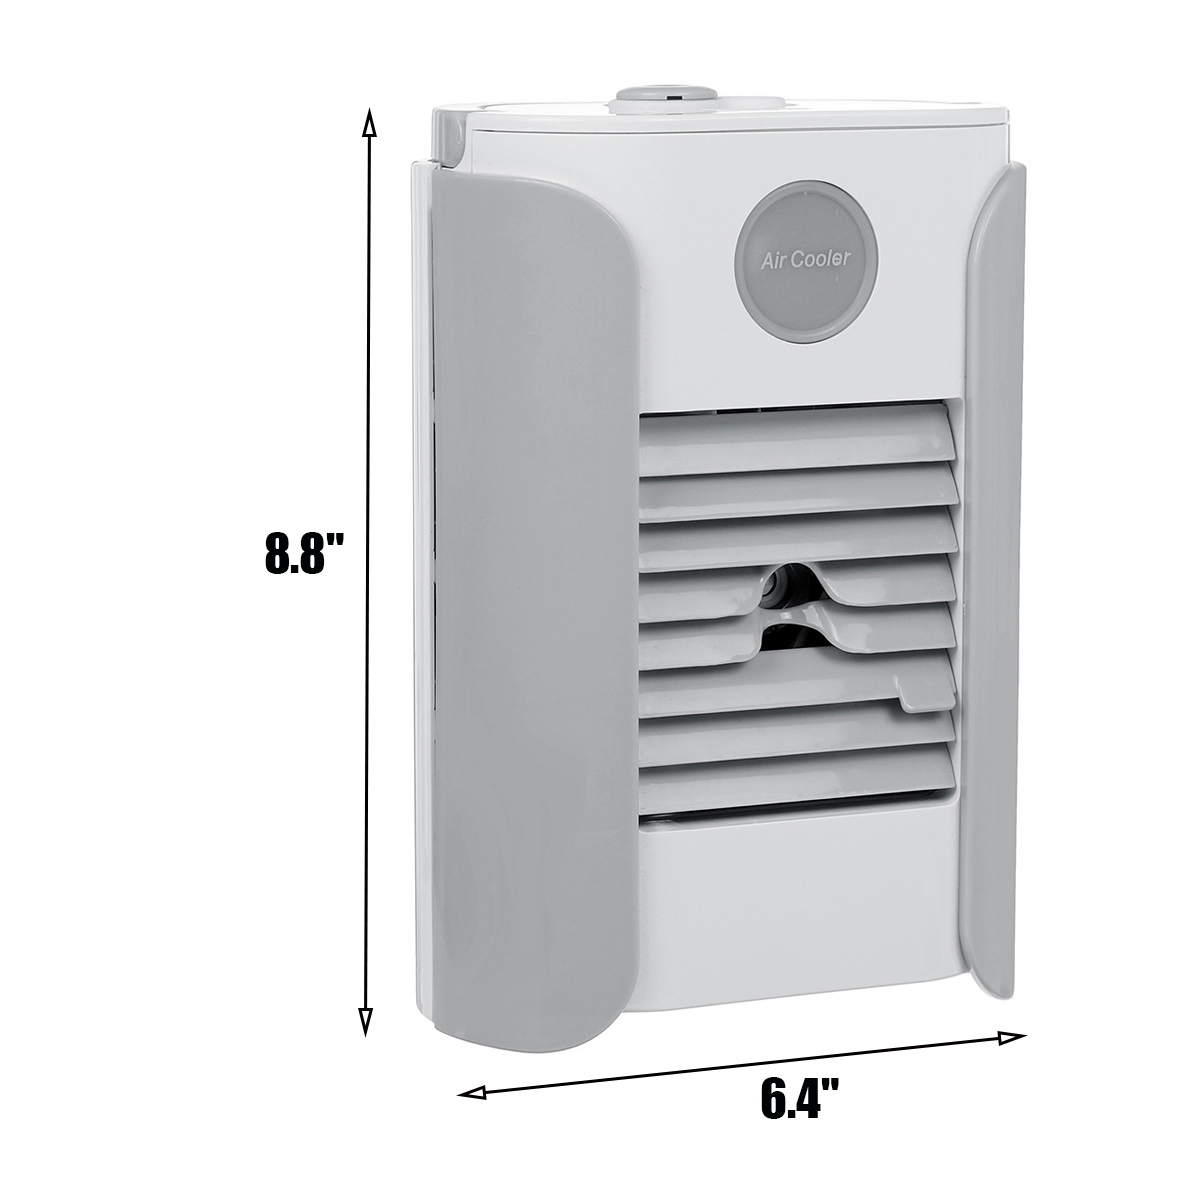 Multifunction-Humidifier-Portable-Air-Cooler-Cool-Conditioner-Conditioning-Fan-1715755-6